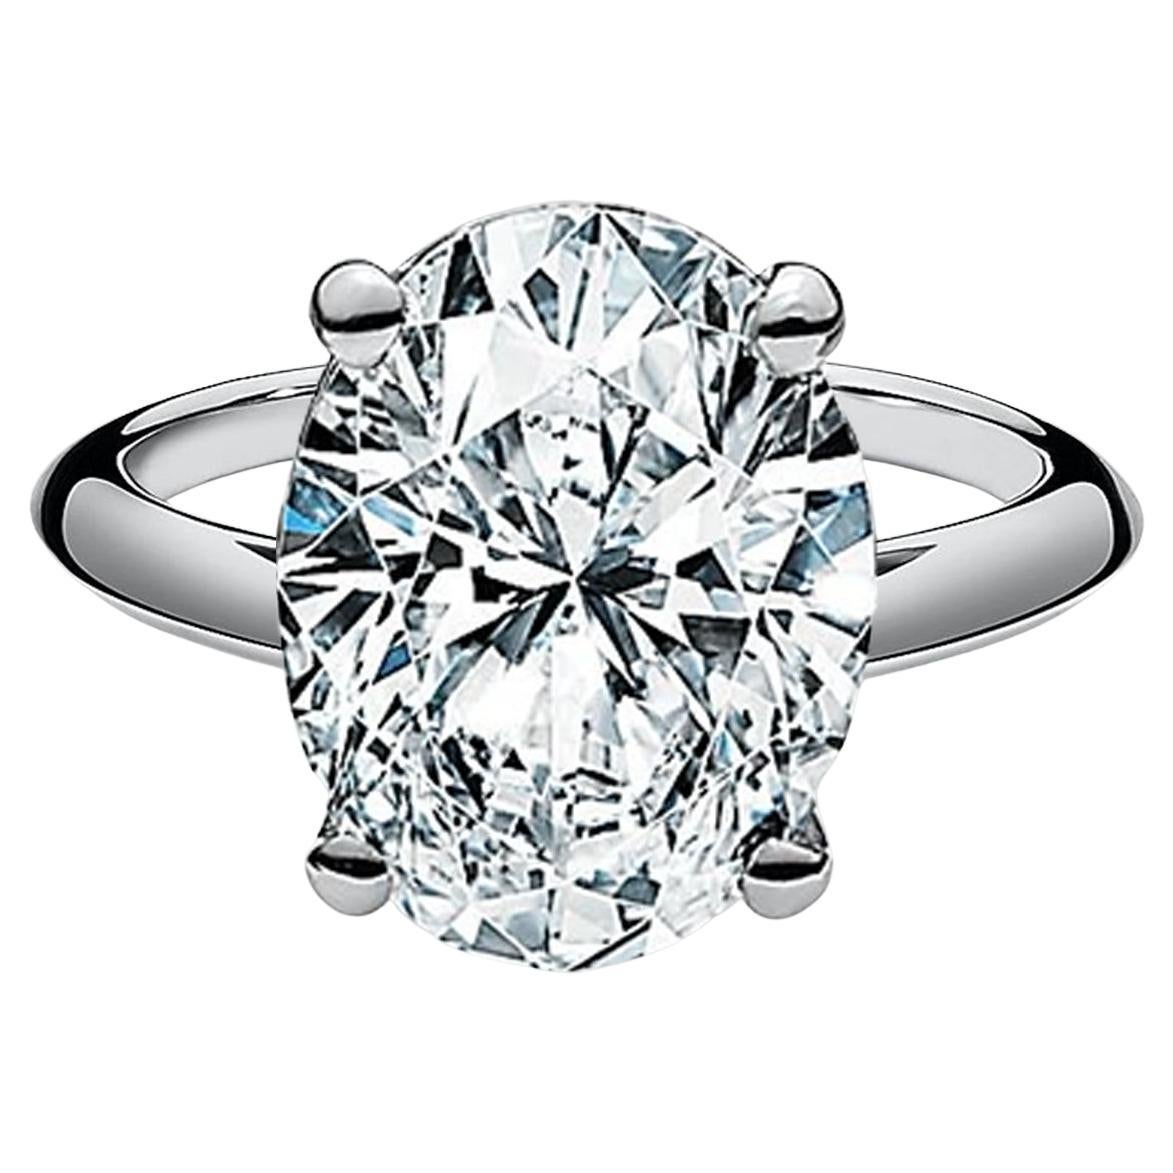 Tiffany & Co. 5.01 ct Platinum Oval Cut Diamond Solitaire Engagement Ring. 



The ring weighs 7 grams, size 6, the center is a Oval Cut diamond weighing 5.01 ct, F in color, VS1 in clarity. The center stone has a Excellent Cut, Very Good Polish,